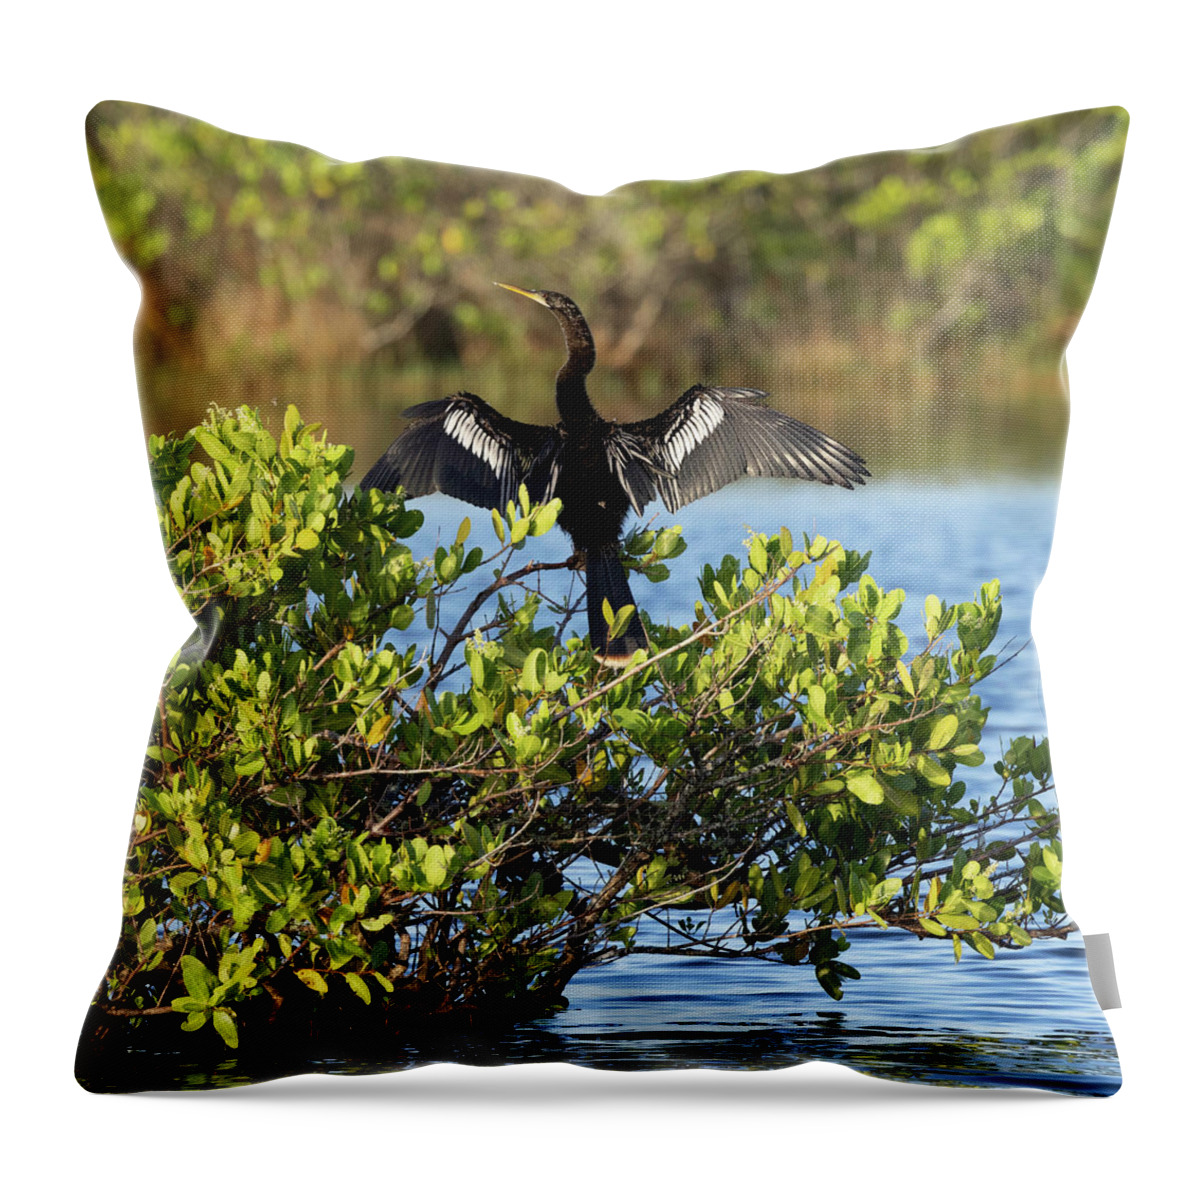 R5-26151 Throw Pillow featuring the photograph Directing Traffic by Gordon Elwell